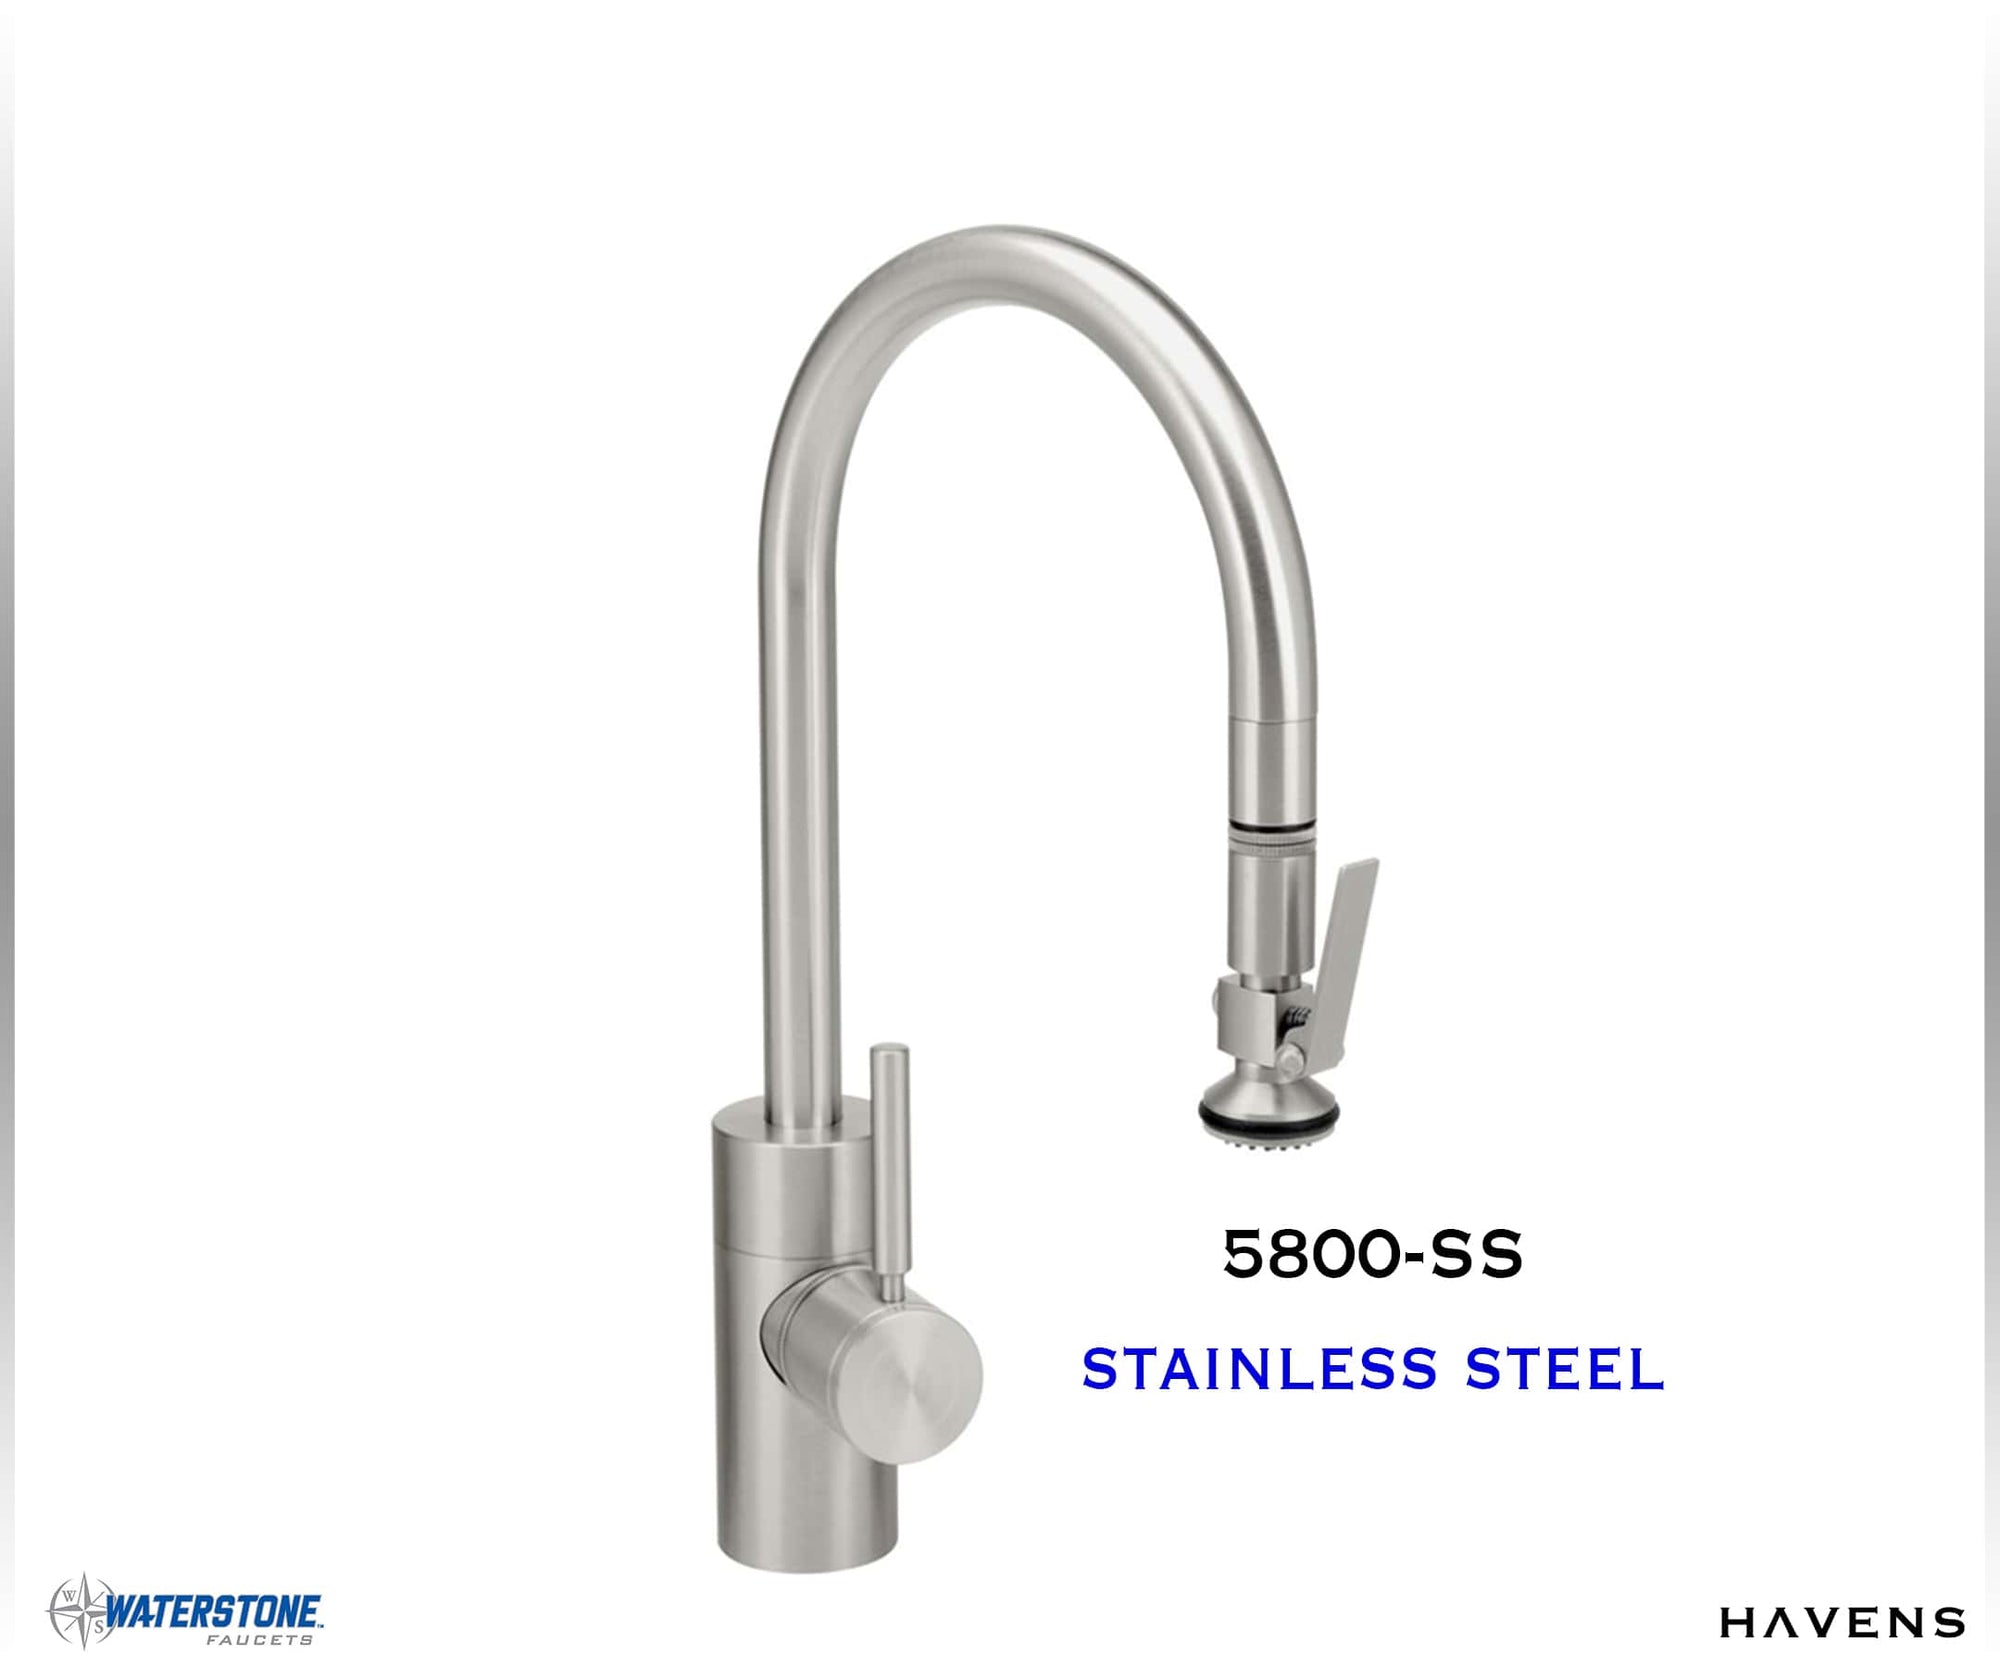 Waterstone Contemporary PLP Pulldown Faucet - 5800